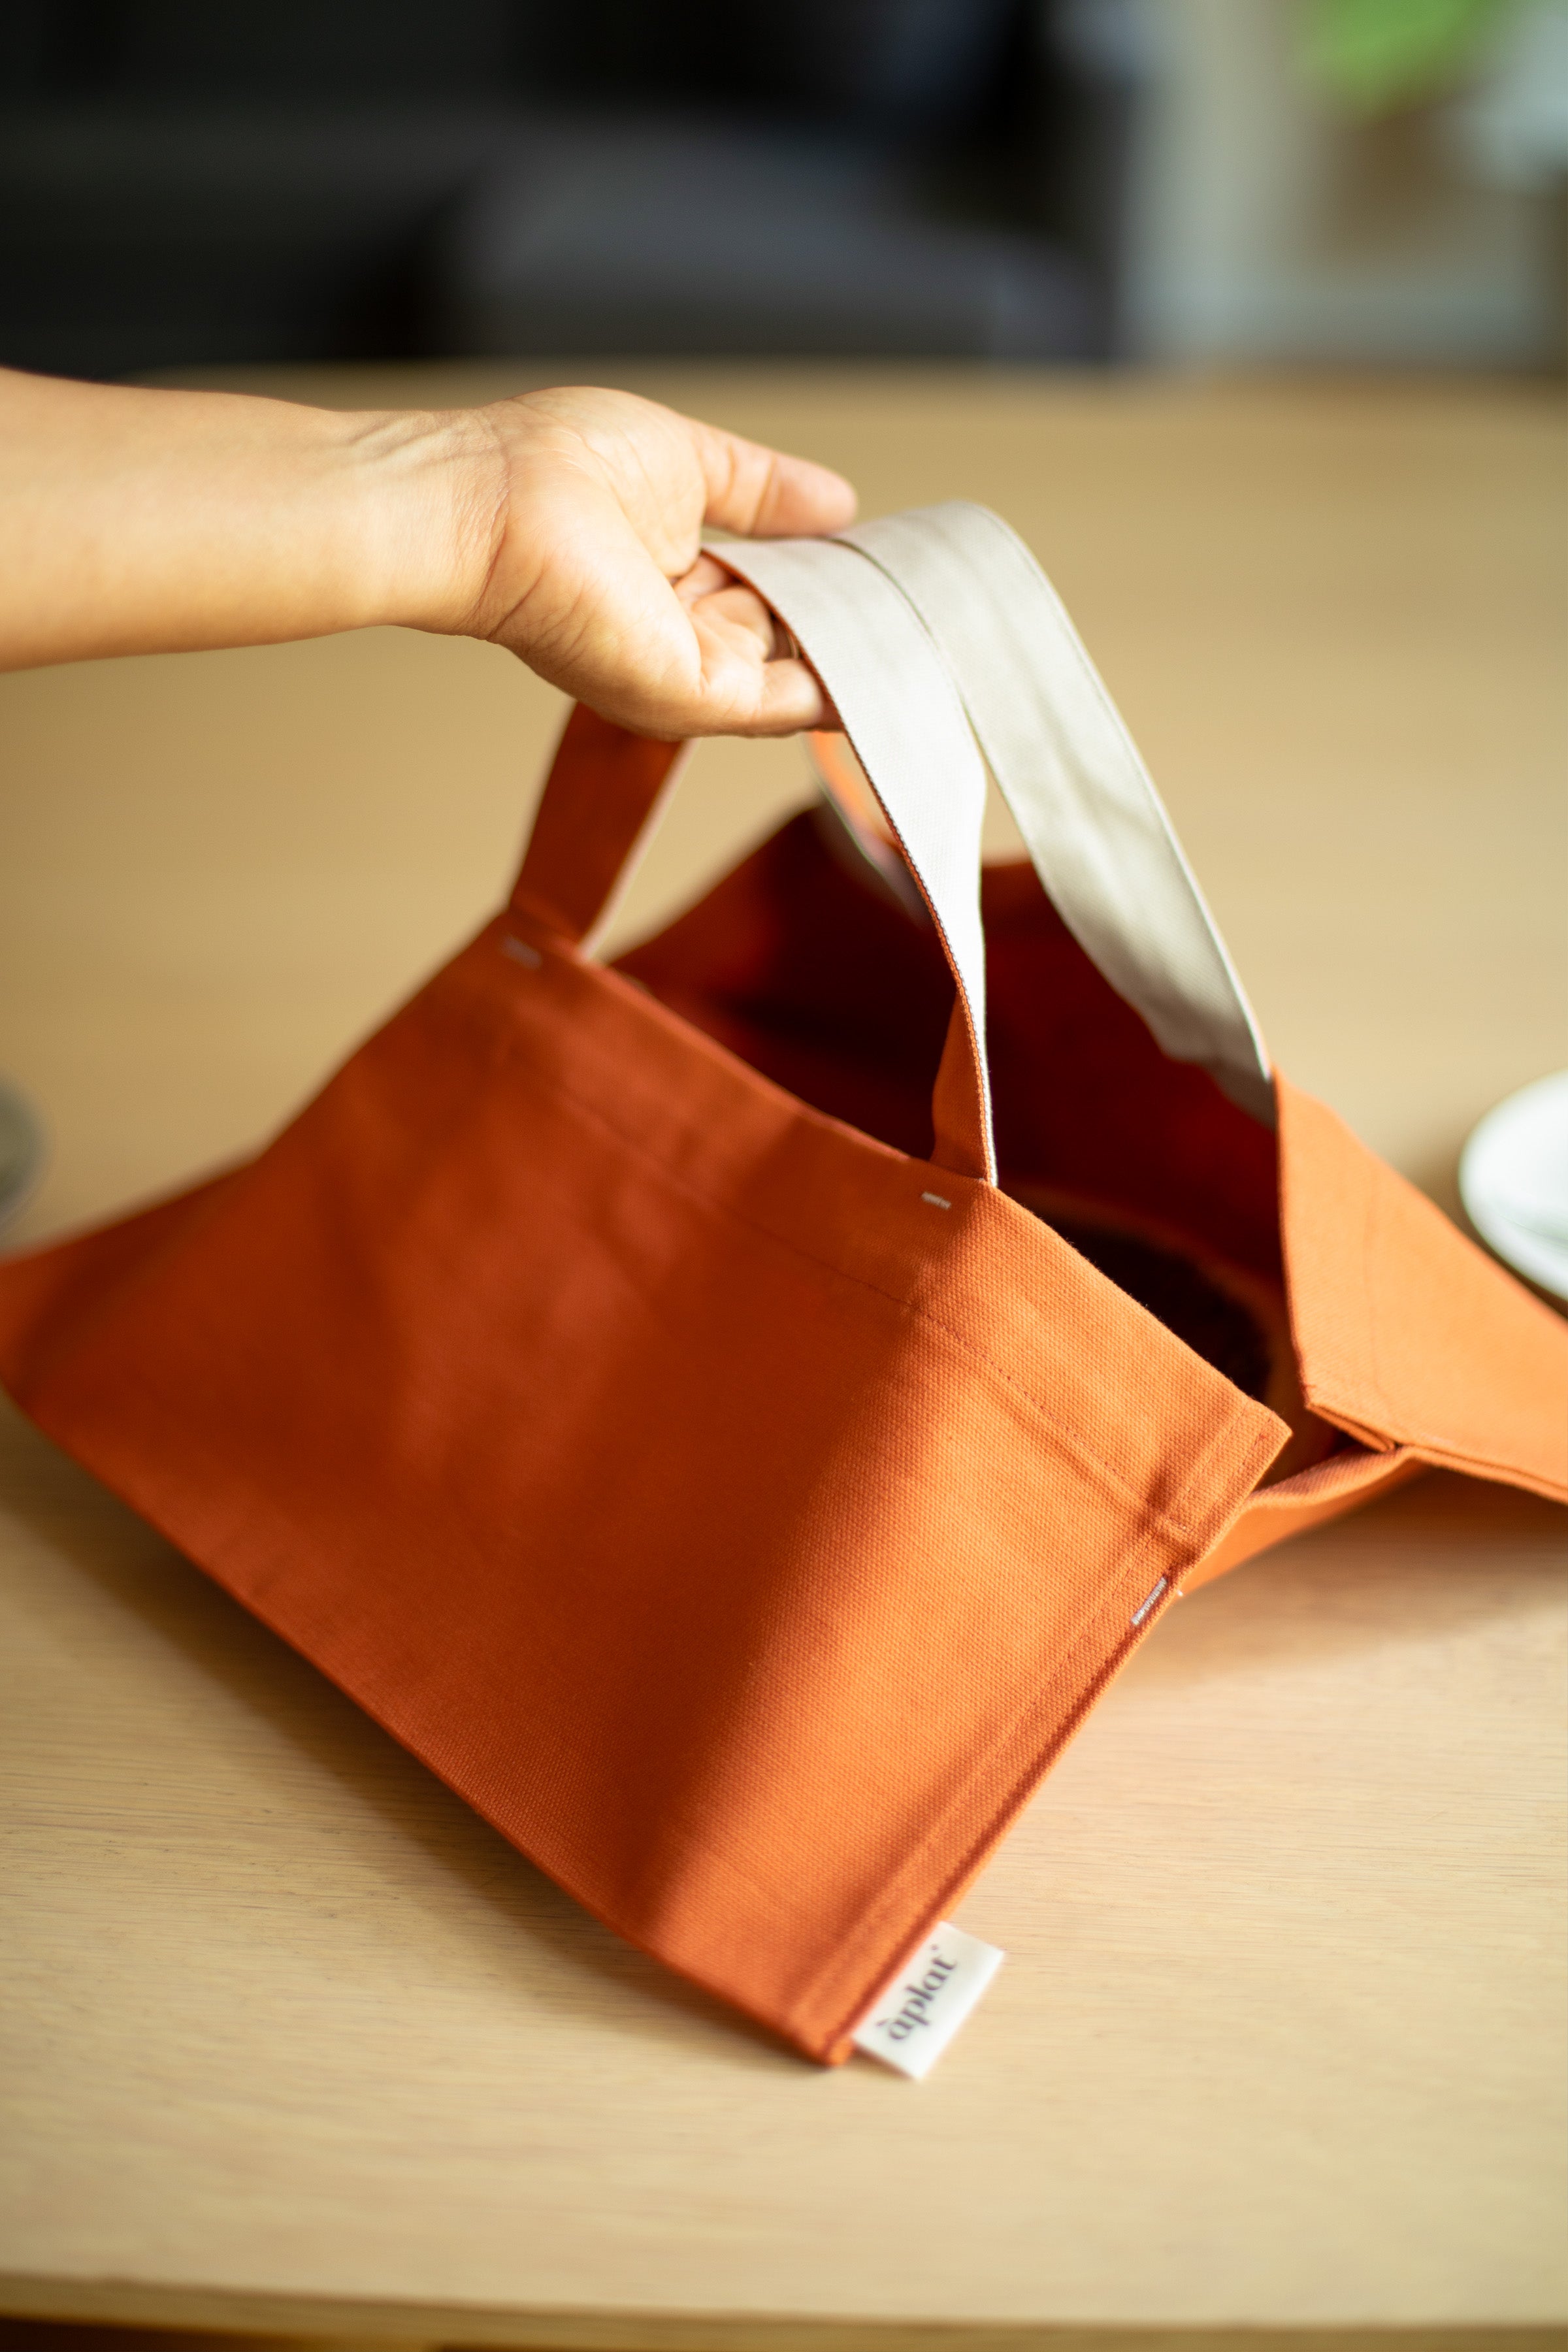 Aplat Reusable Culinary Totes for Carrying Food, Baguettes and More